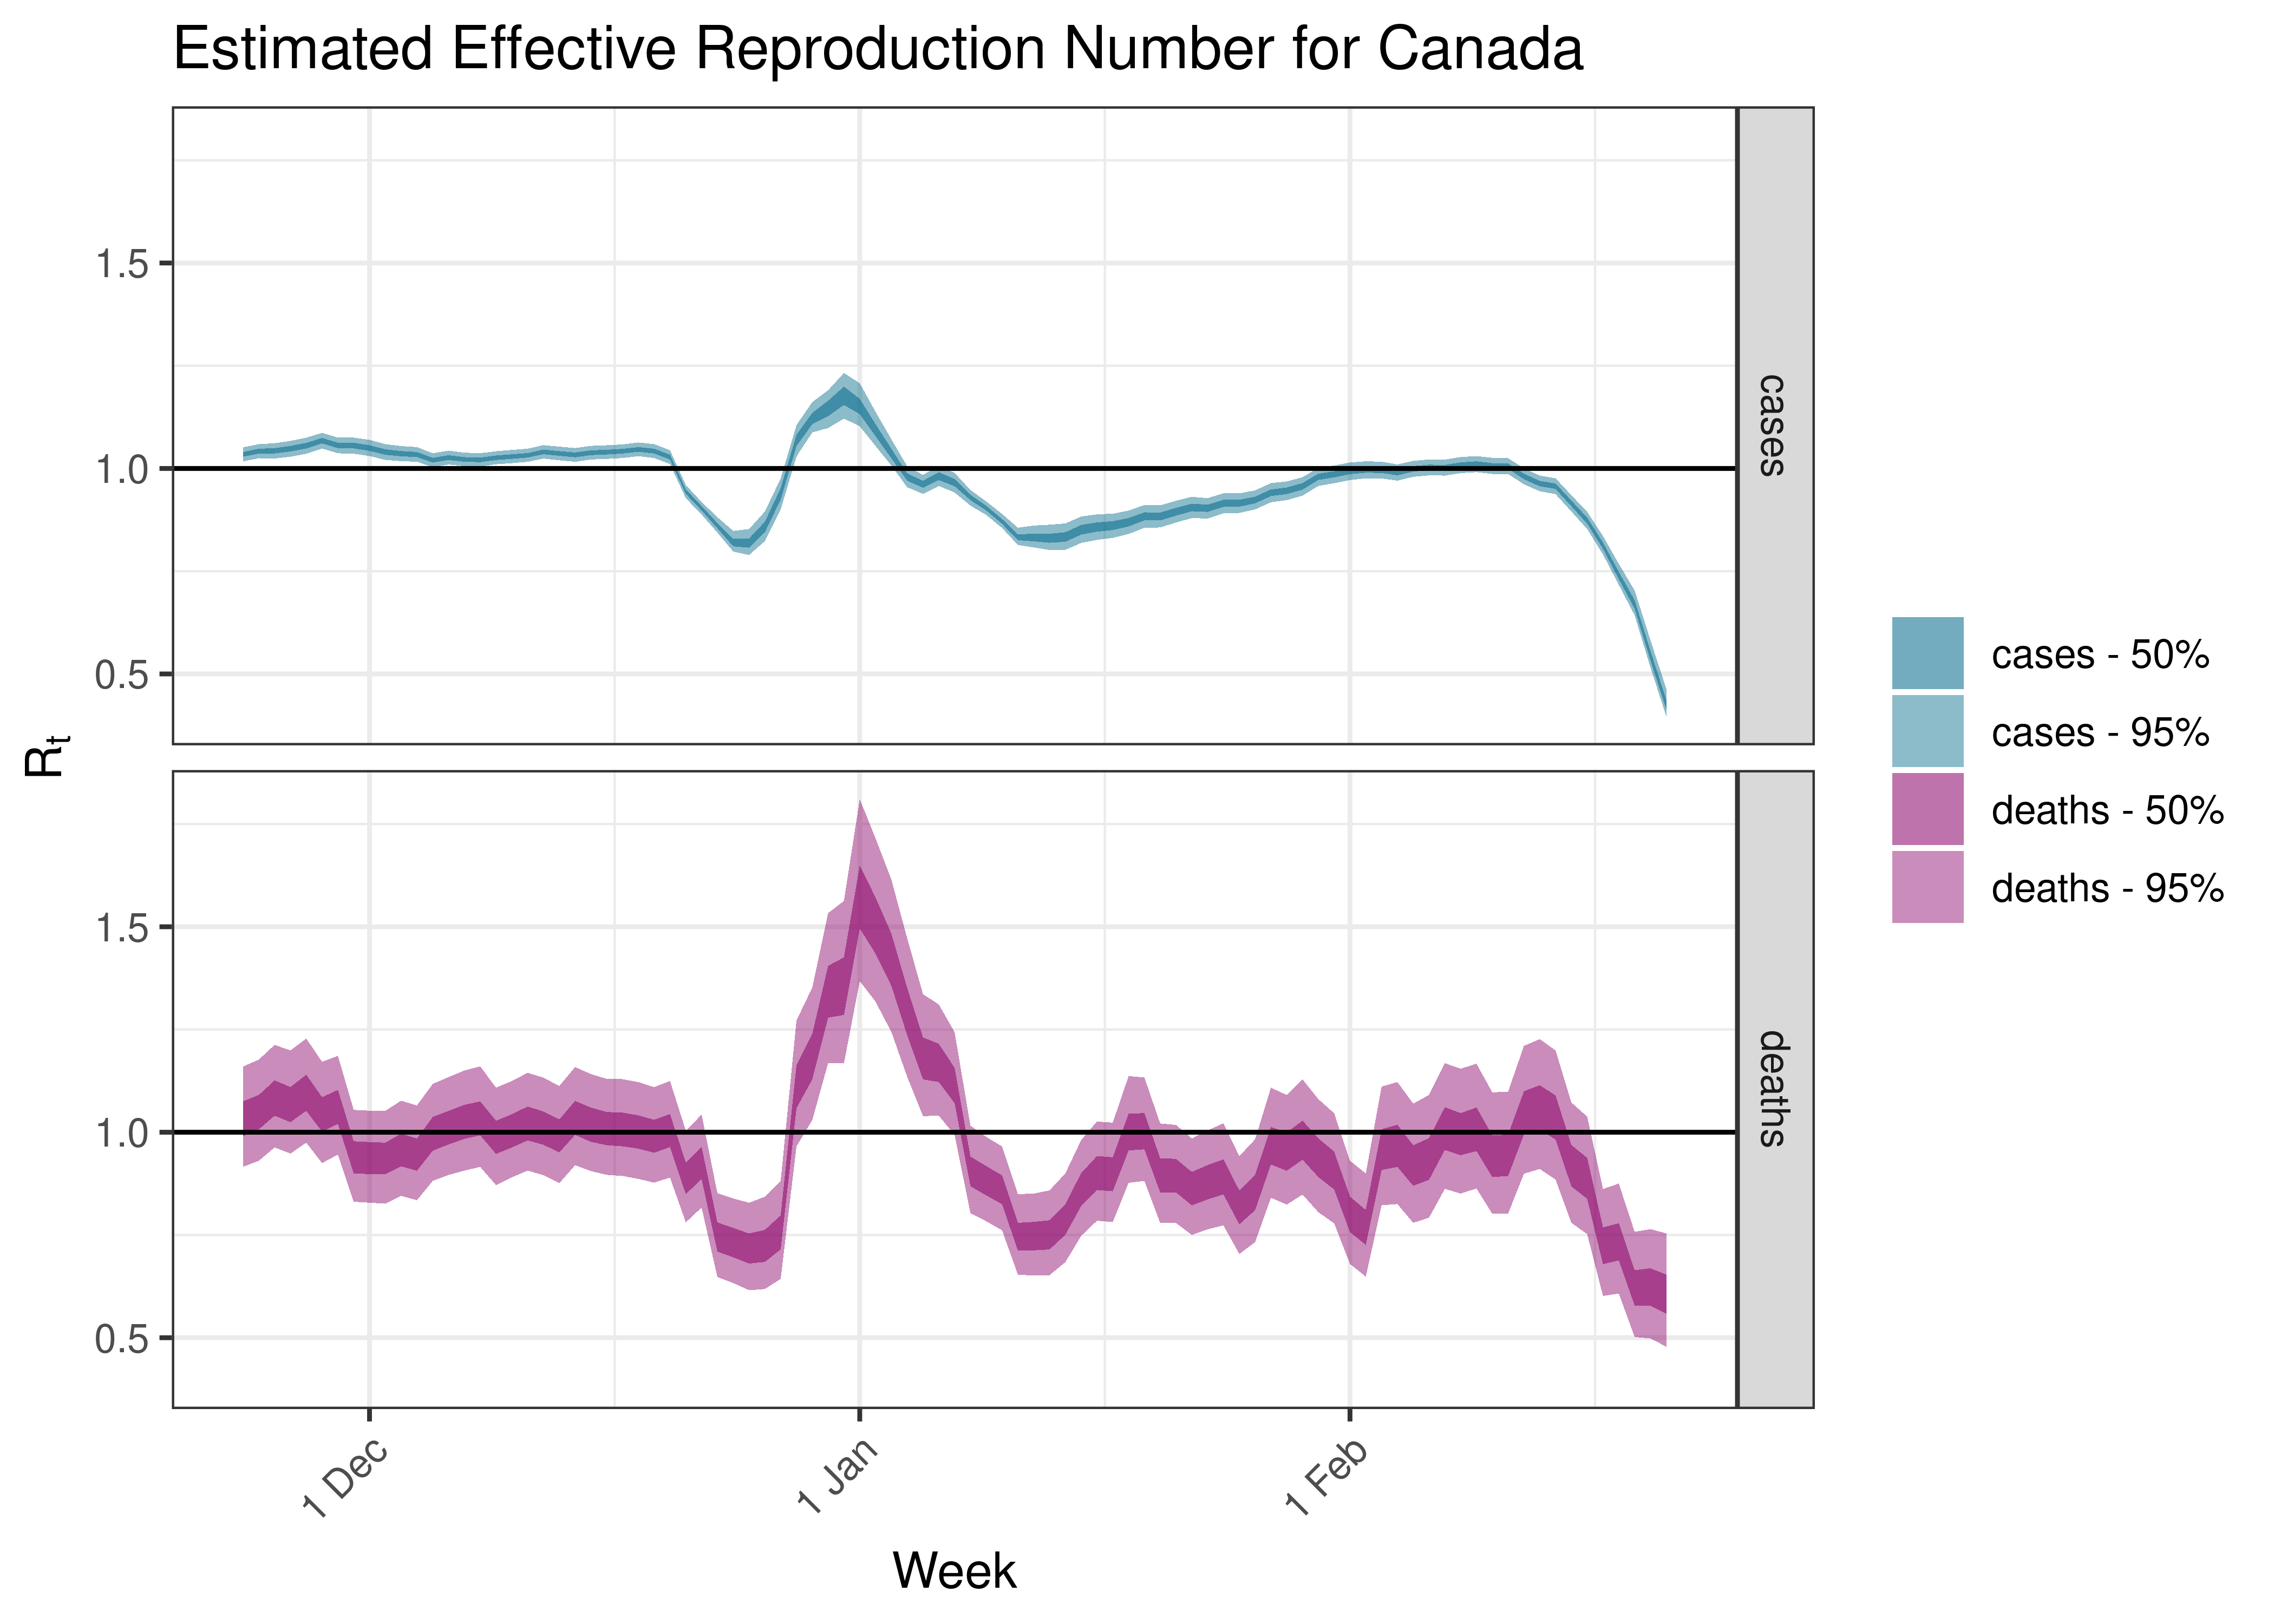 Estimated Effective Reproduction Number for Canada over Time